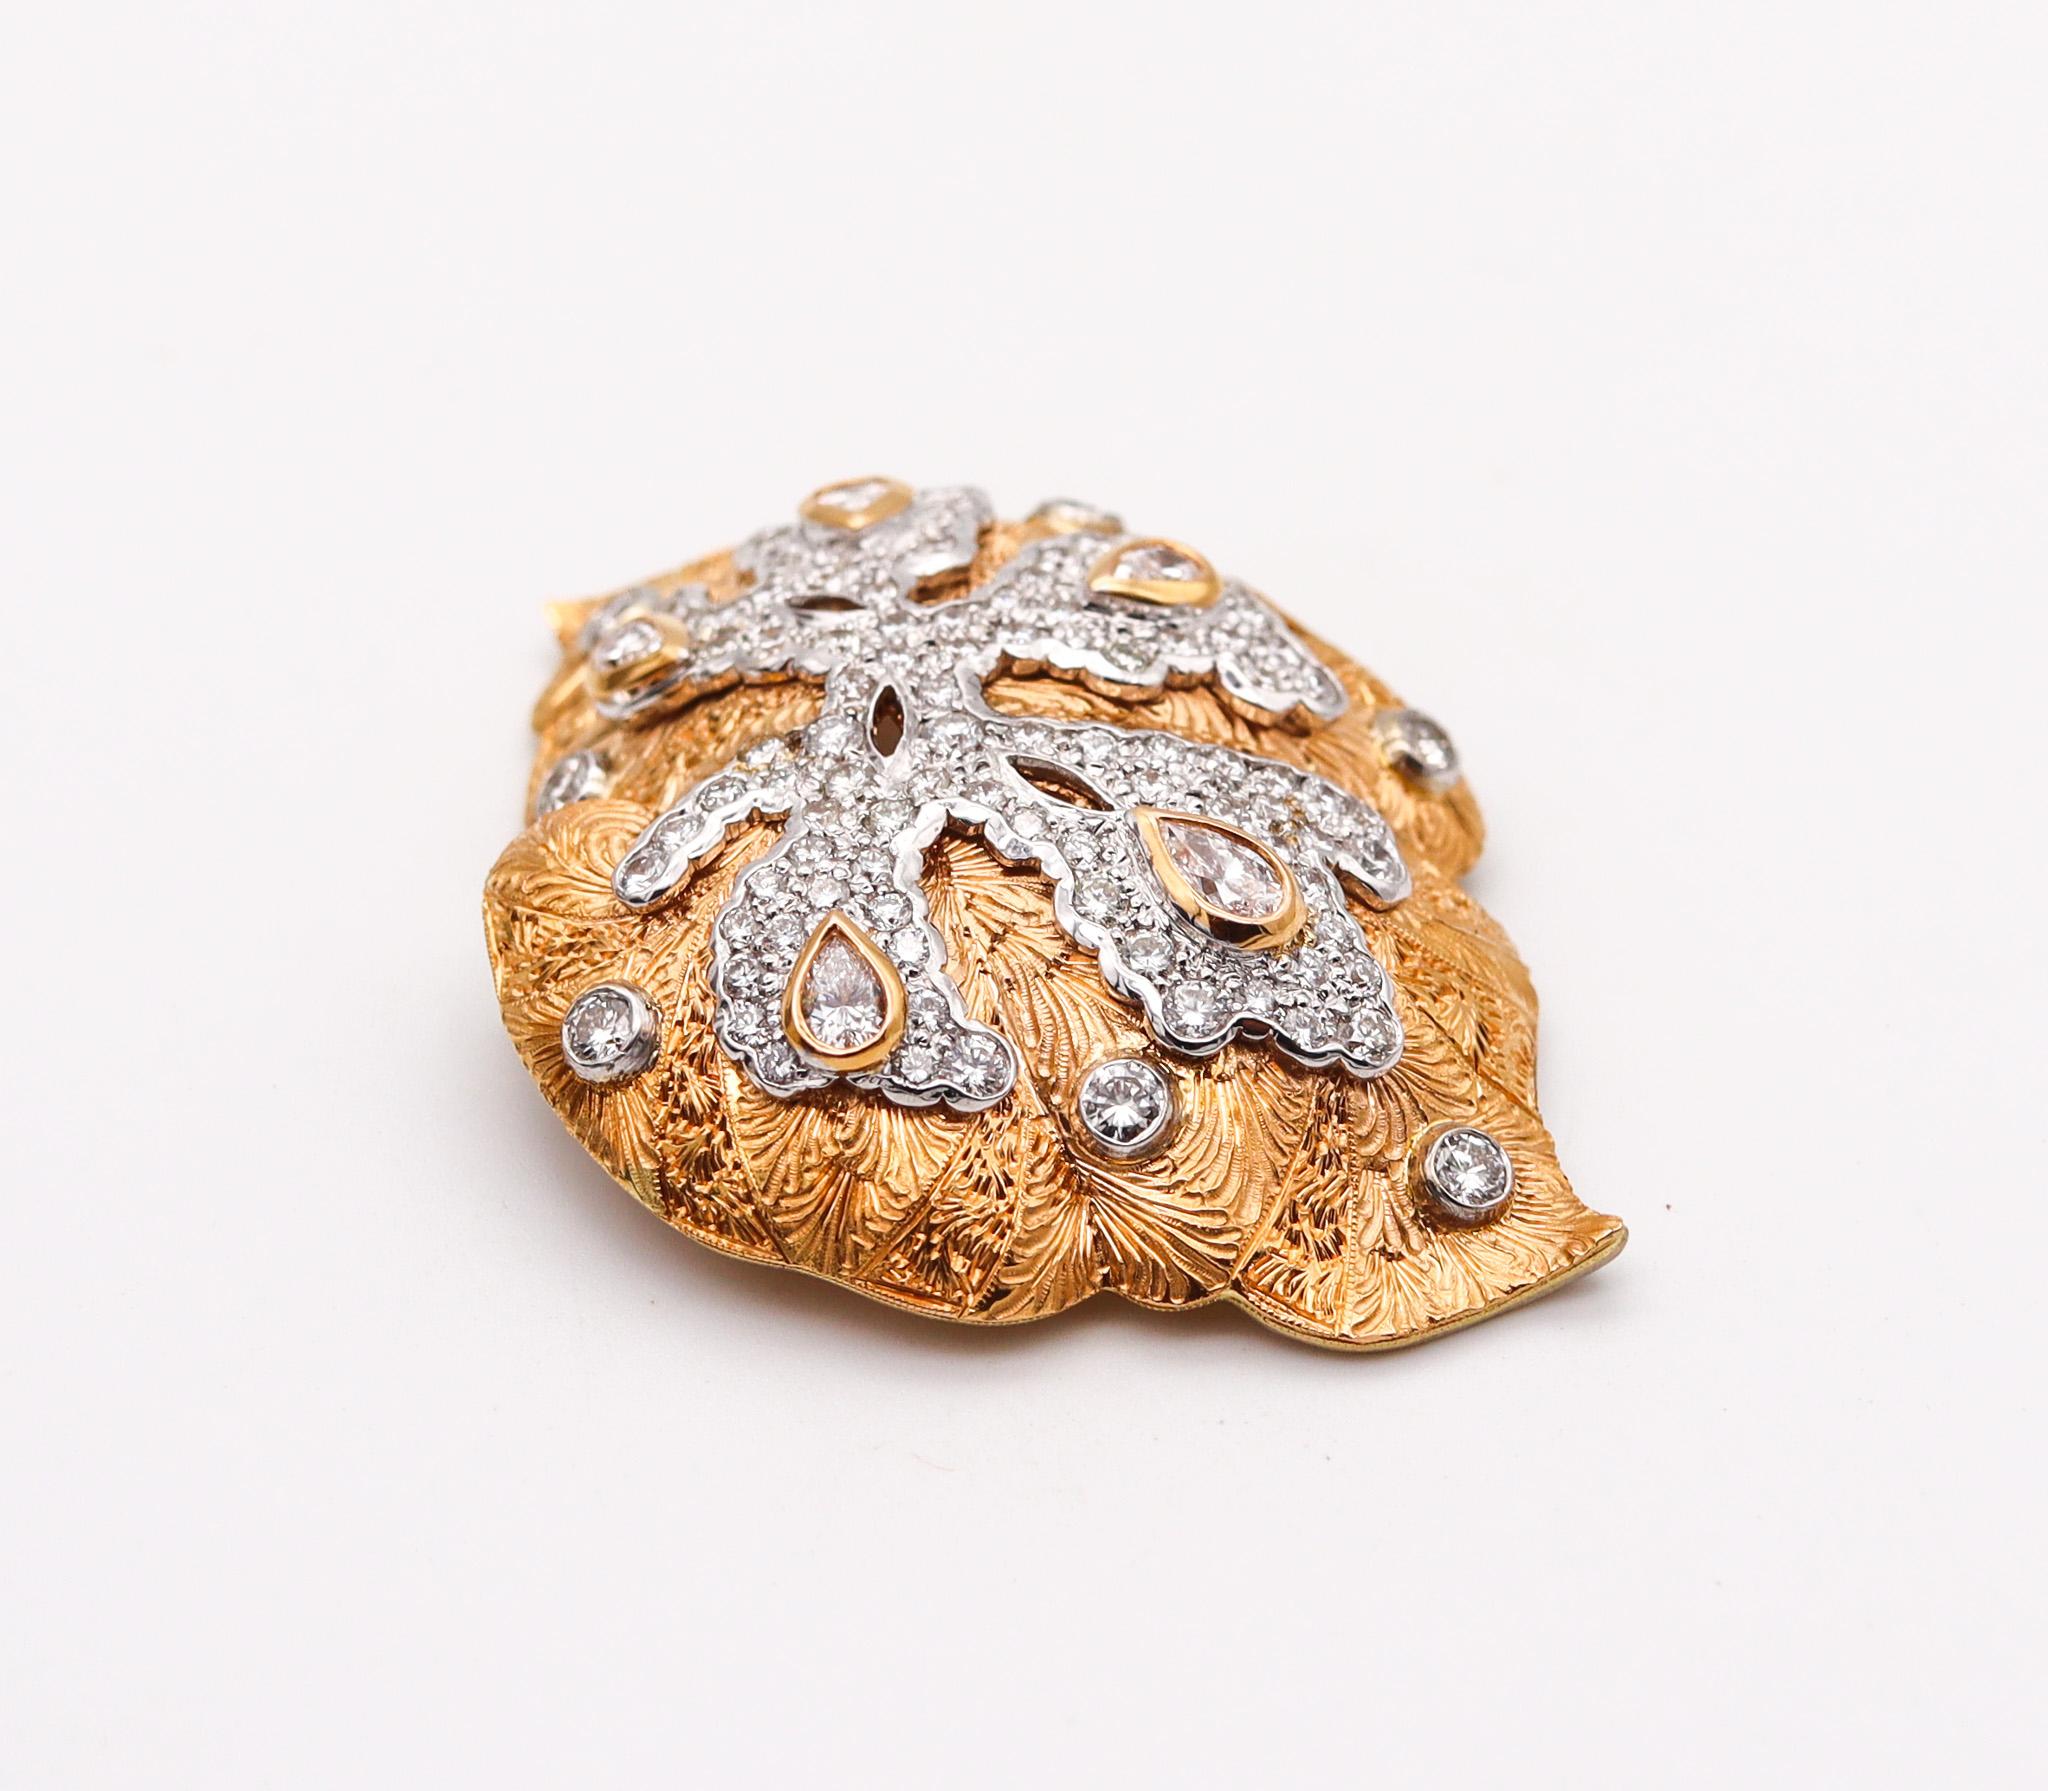 Abstract brooch designed by Cazzaniga.

An exceptional abstract brooch, created in Roma Italy by the fine jewelry house of Cazzaniga, back in the 1970. This brooch has been crafted in the shape of an irregular leaf, with intricate patterns of